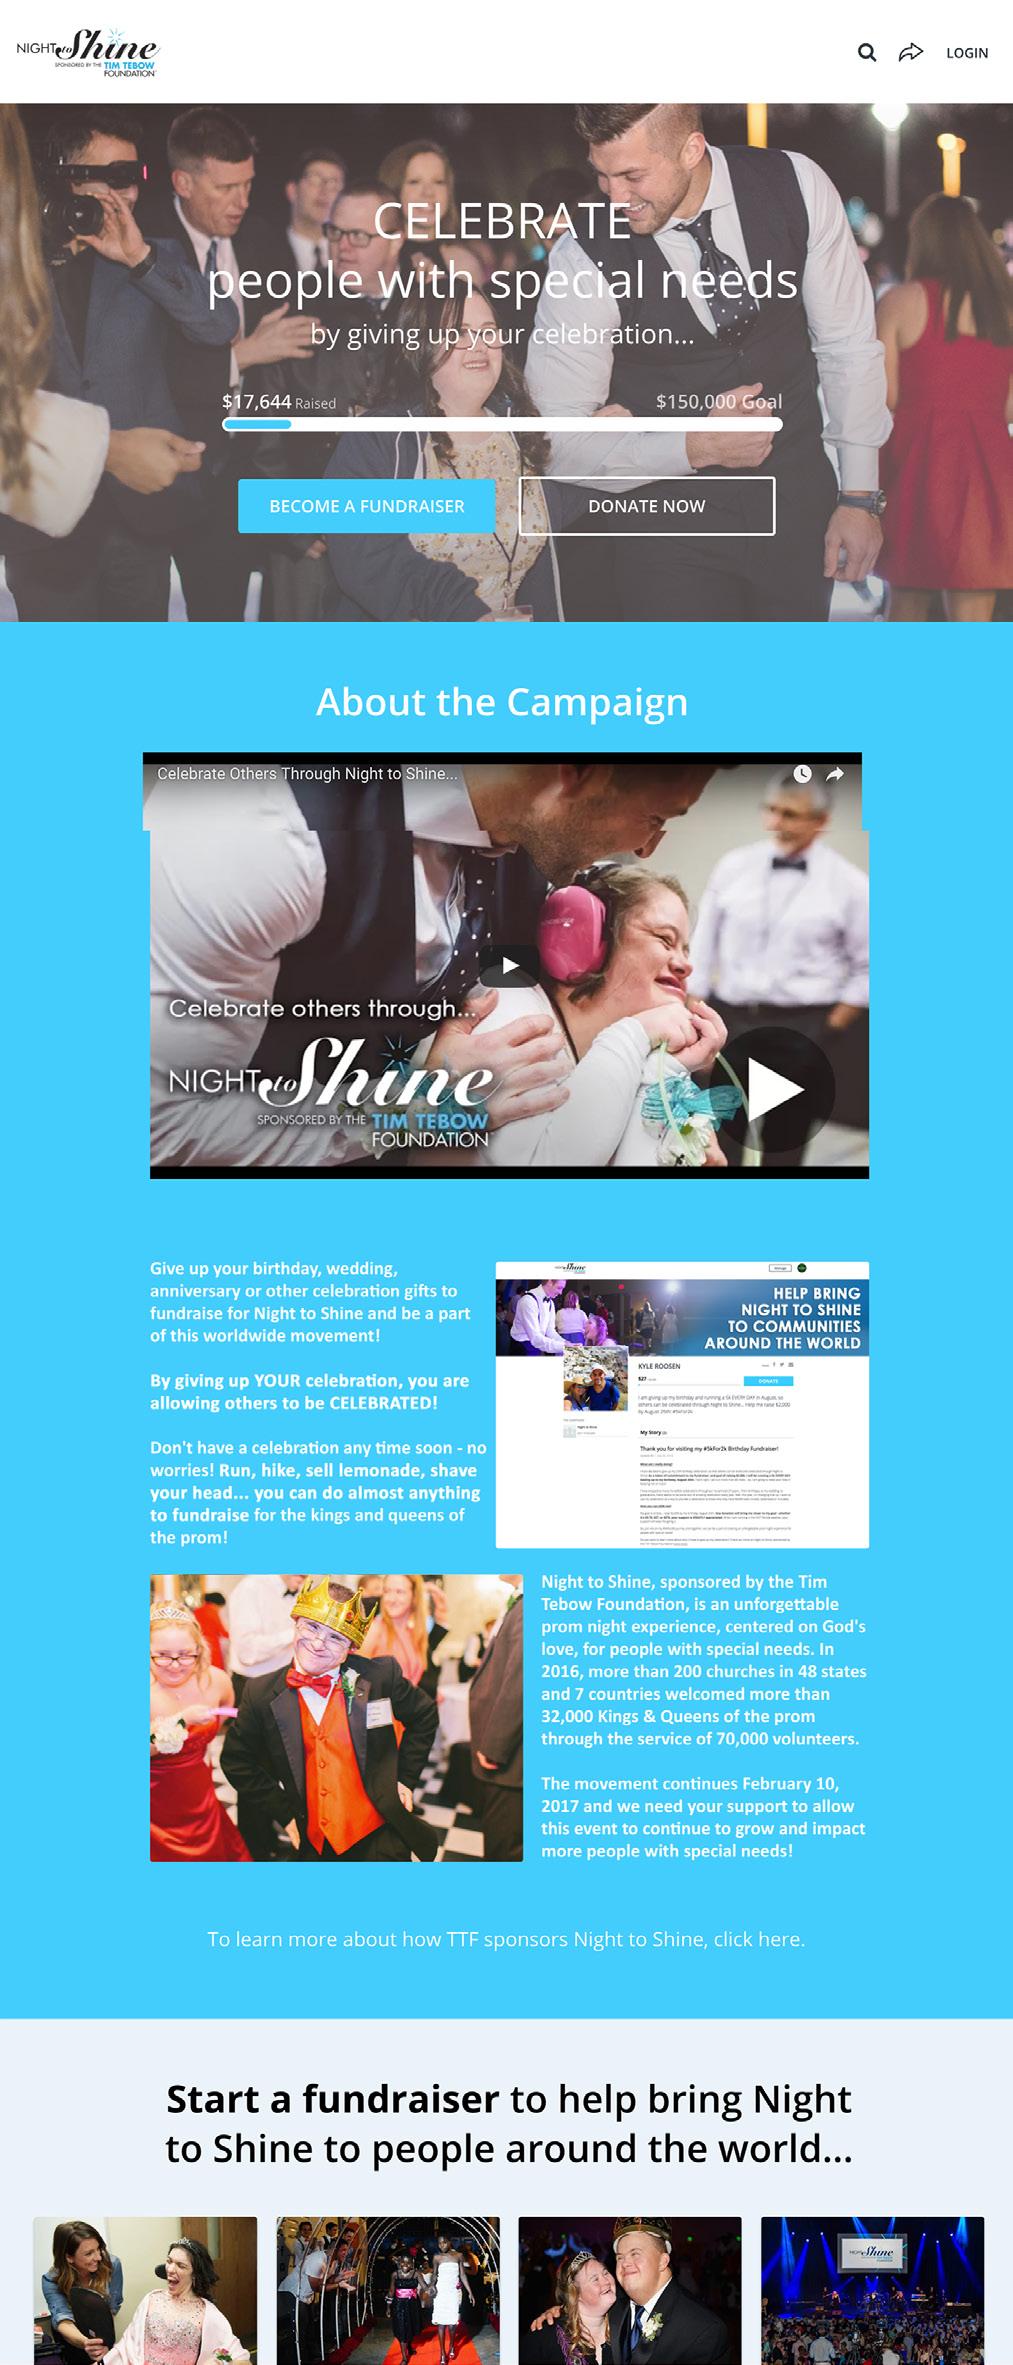 WHAT WE LOVE ABOUT IT Signature Color Throughout Page Video Evokes Emotional Response The Tim Tebow Foundation uses a moving video in their About Block to provide context to the campaign in a way